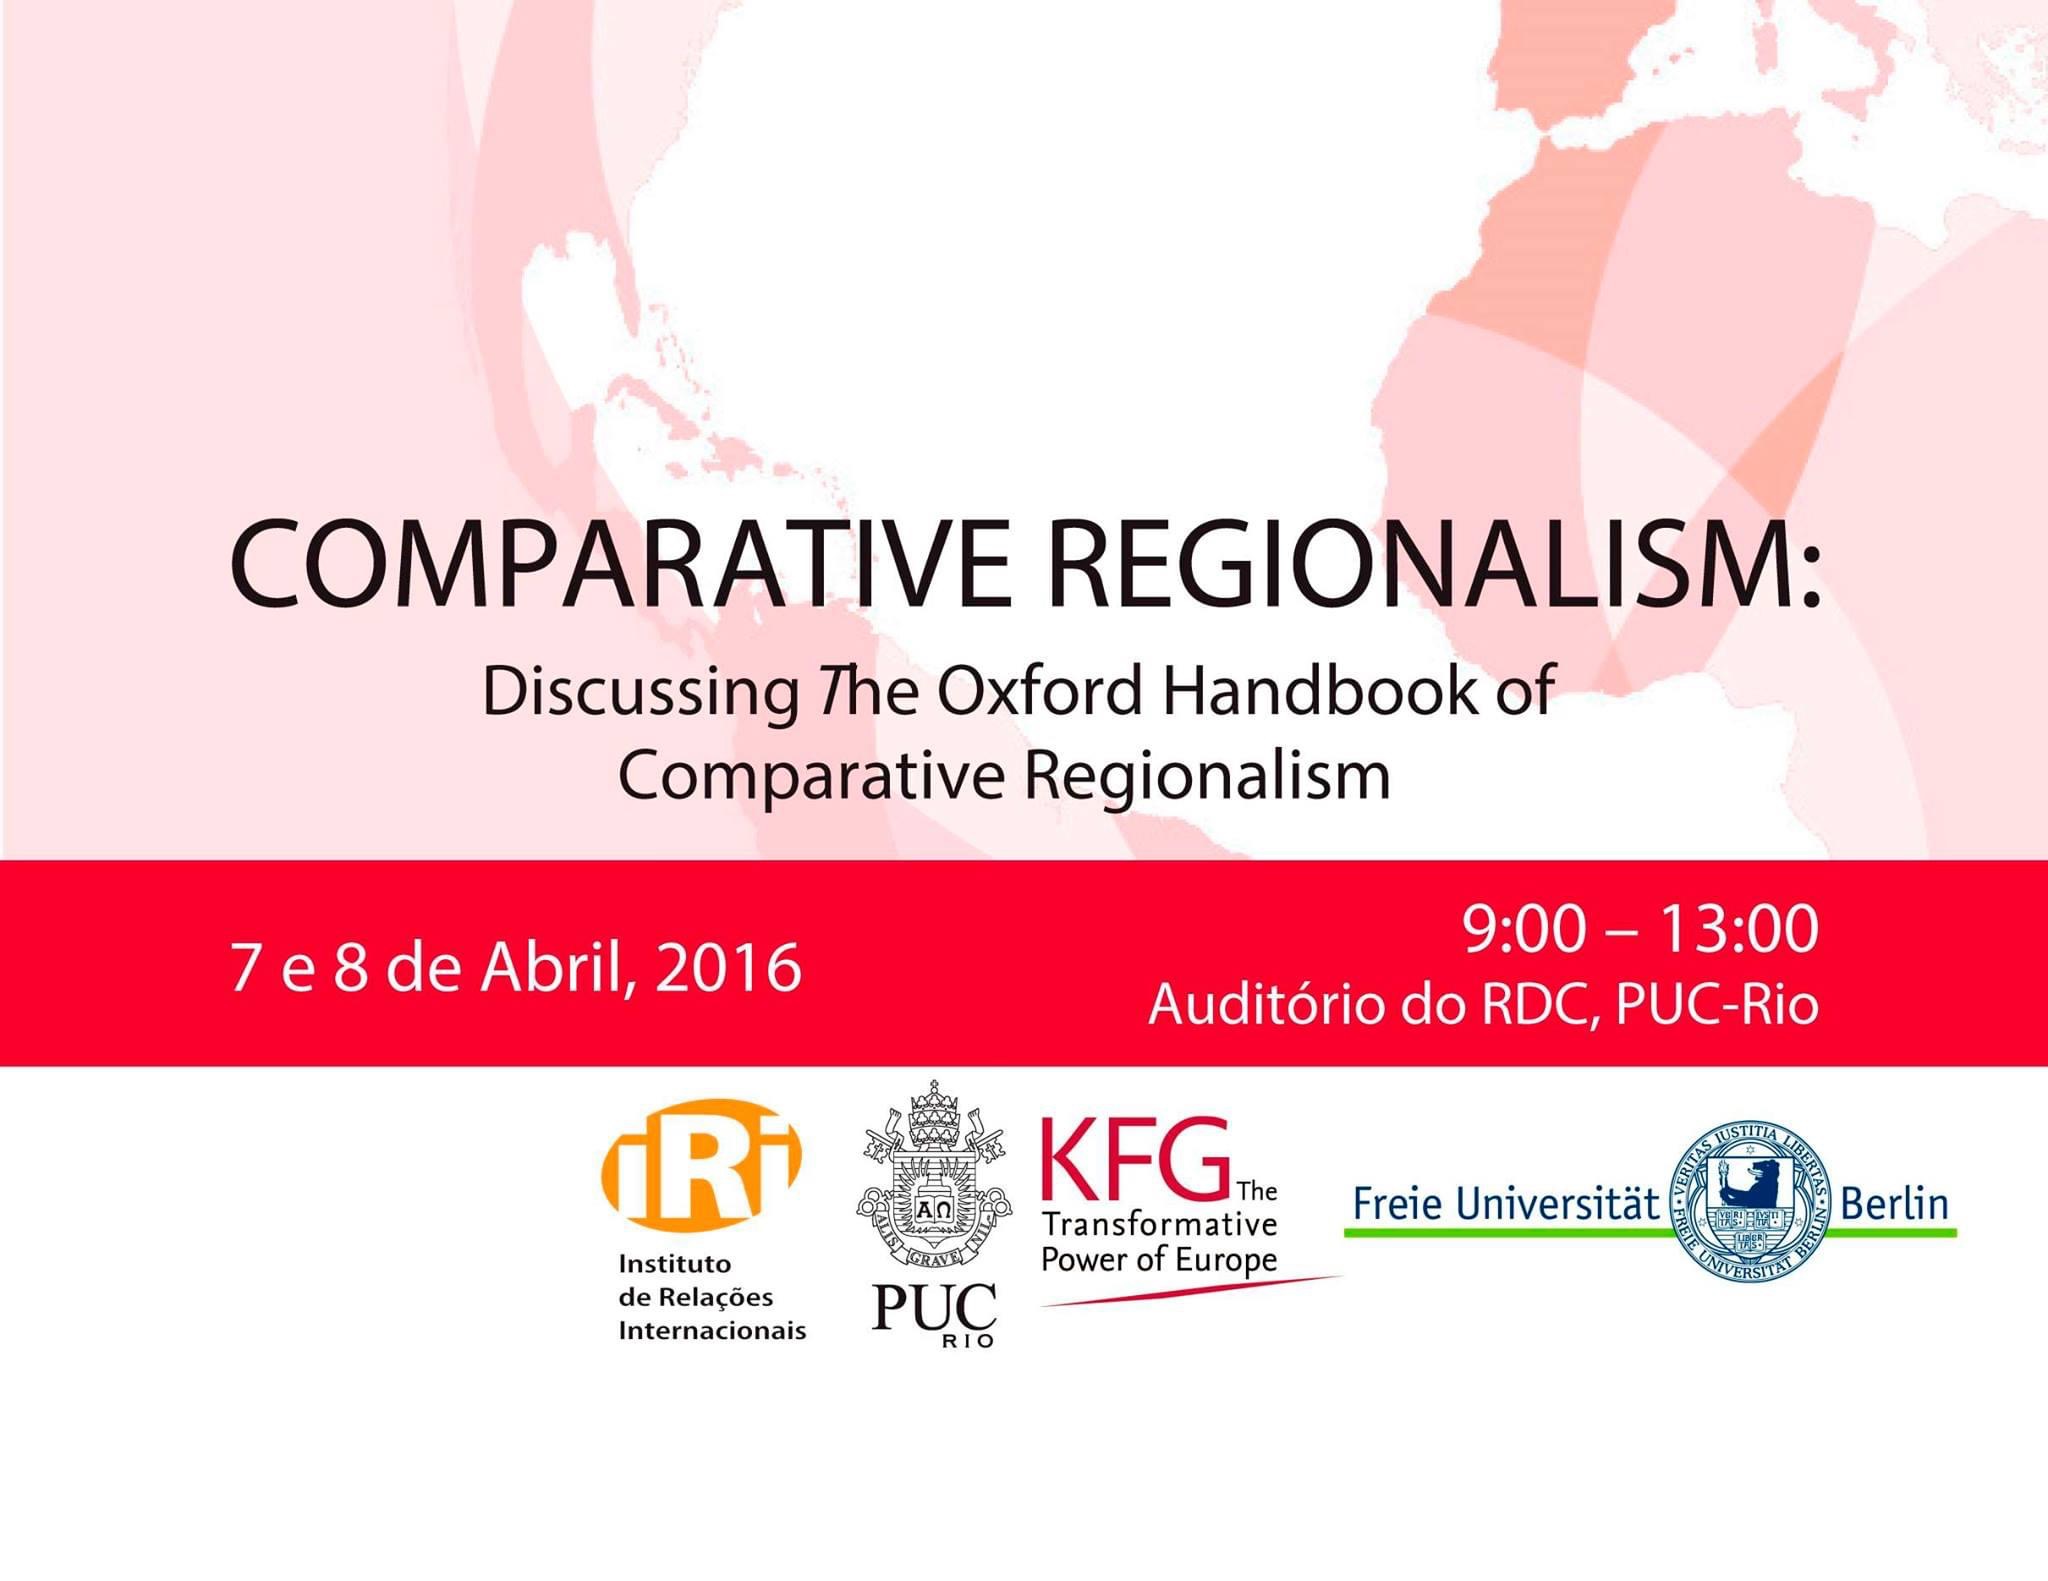 Comparative Regionalism: Discussing The Oxford Handbook of Comparative Regionalism